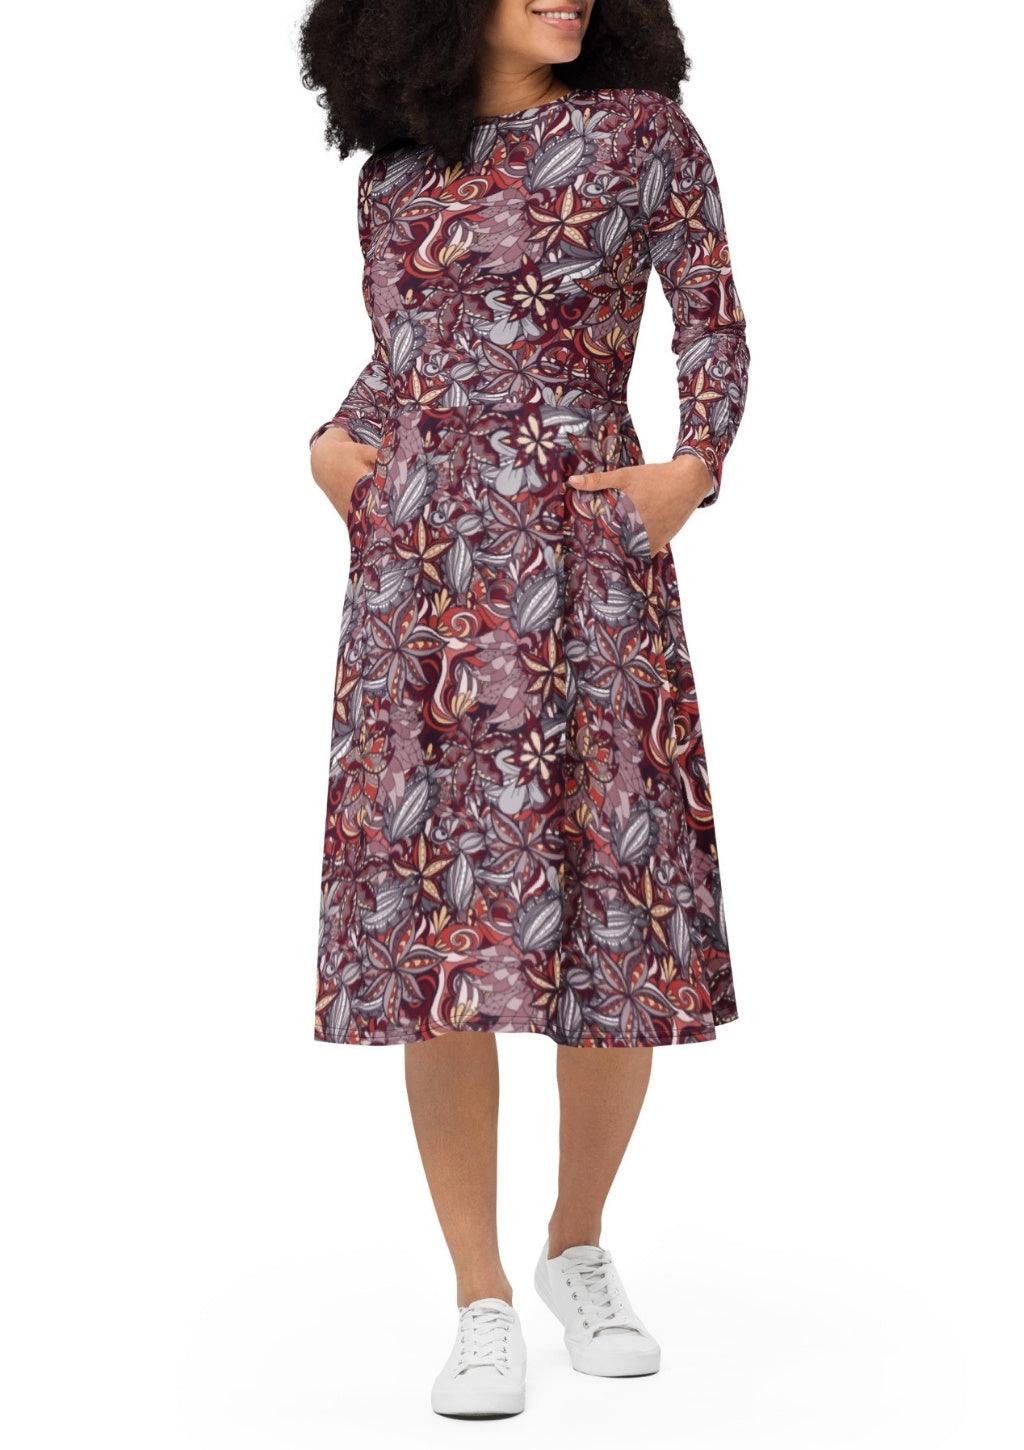 Biei Long Sleeve Midi Fit & Flare Pocket Dress  - Dark Abstract Floral Print - Retro All Over Print Paisley Floral Abstract - Plus Size 